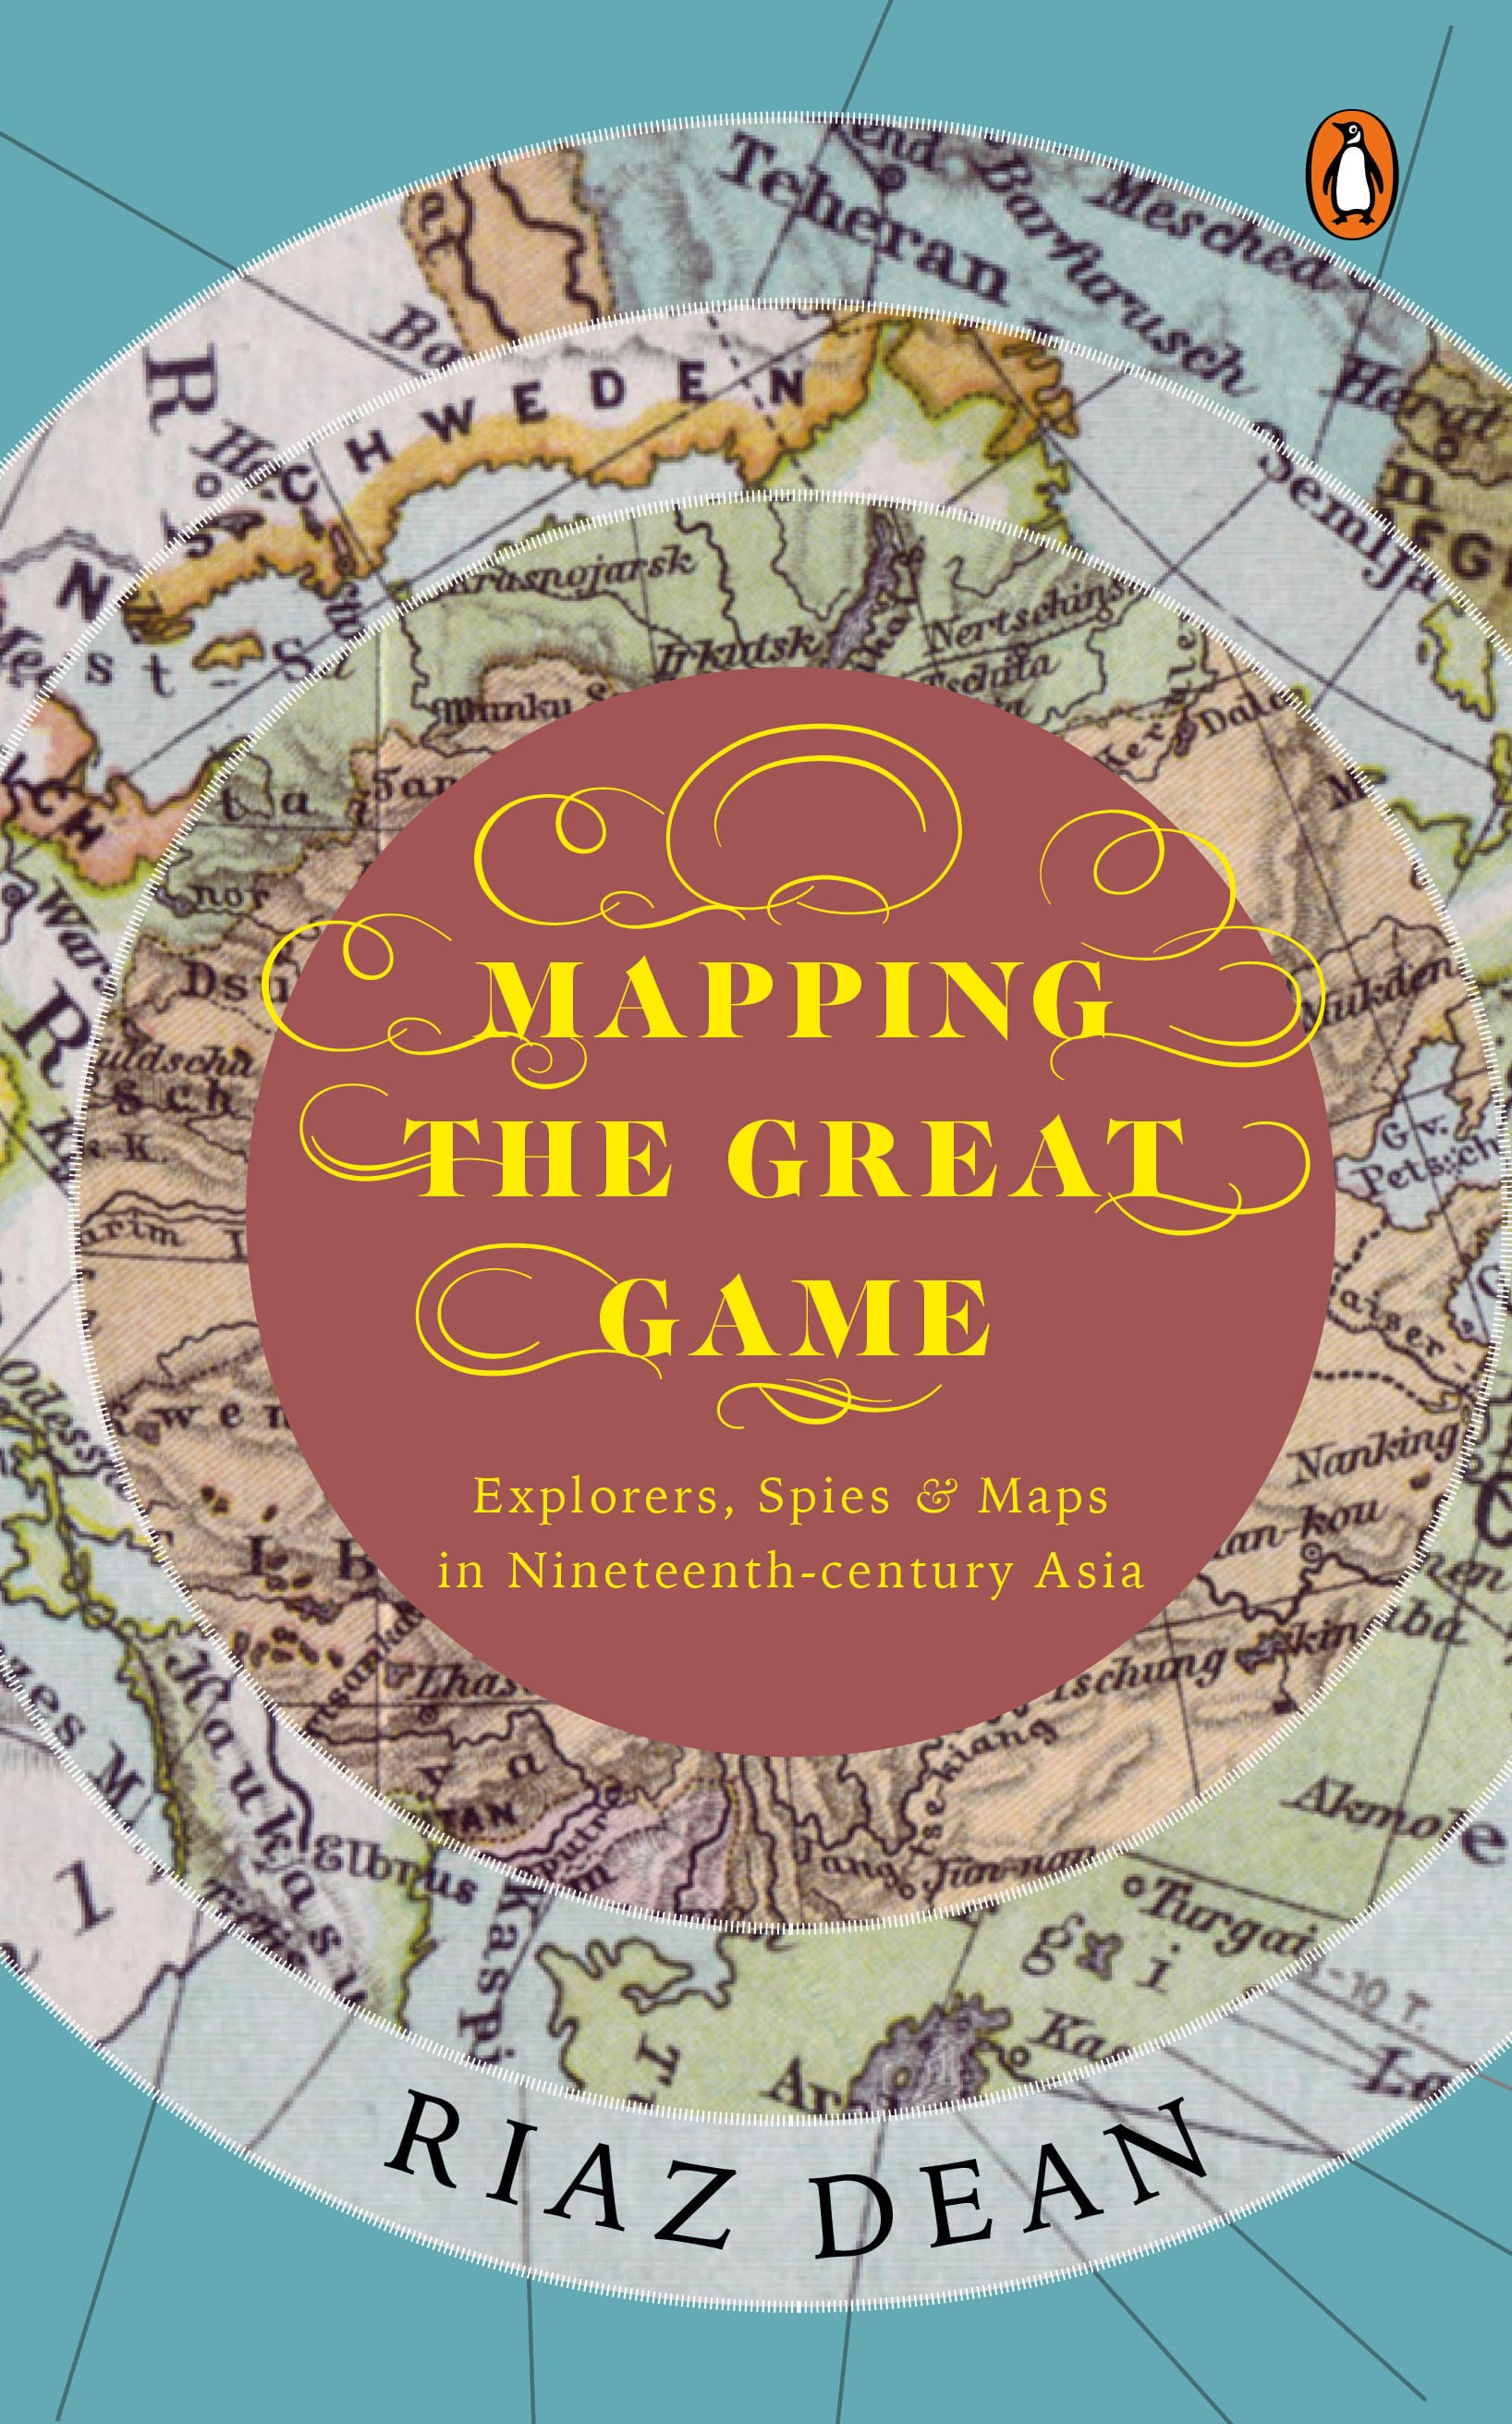 "Mapping The Great Game": Tales of derring-do of explorers, spies and map-makers who helped map a large part of Asia as we know it today